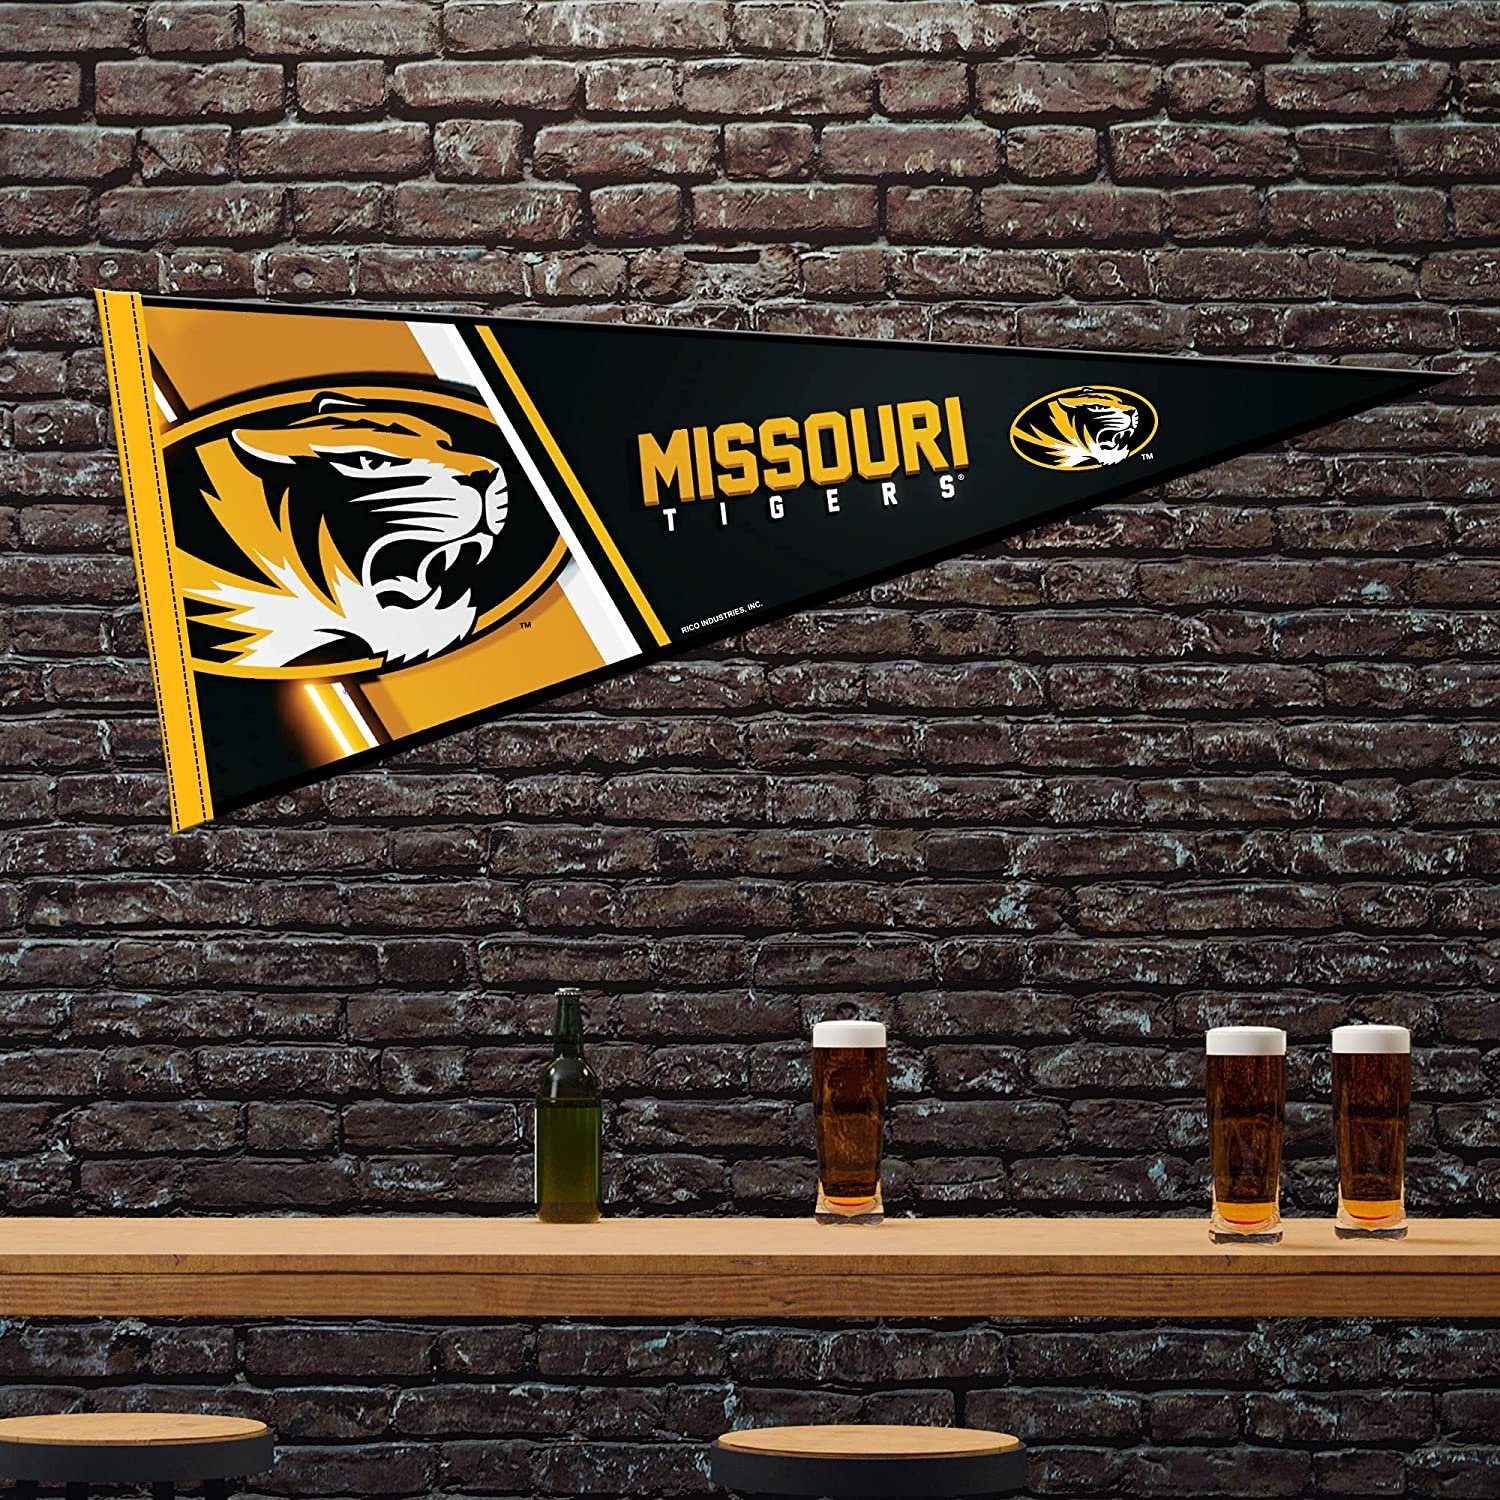 University of Missouri Tigers Soft Felt Pennant, Primary Design, 12x30 Inch, Easy To Hang